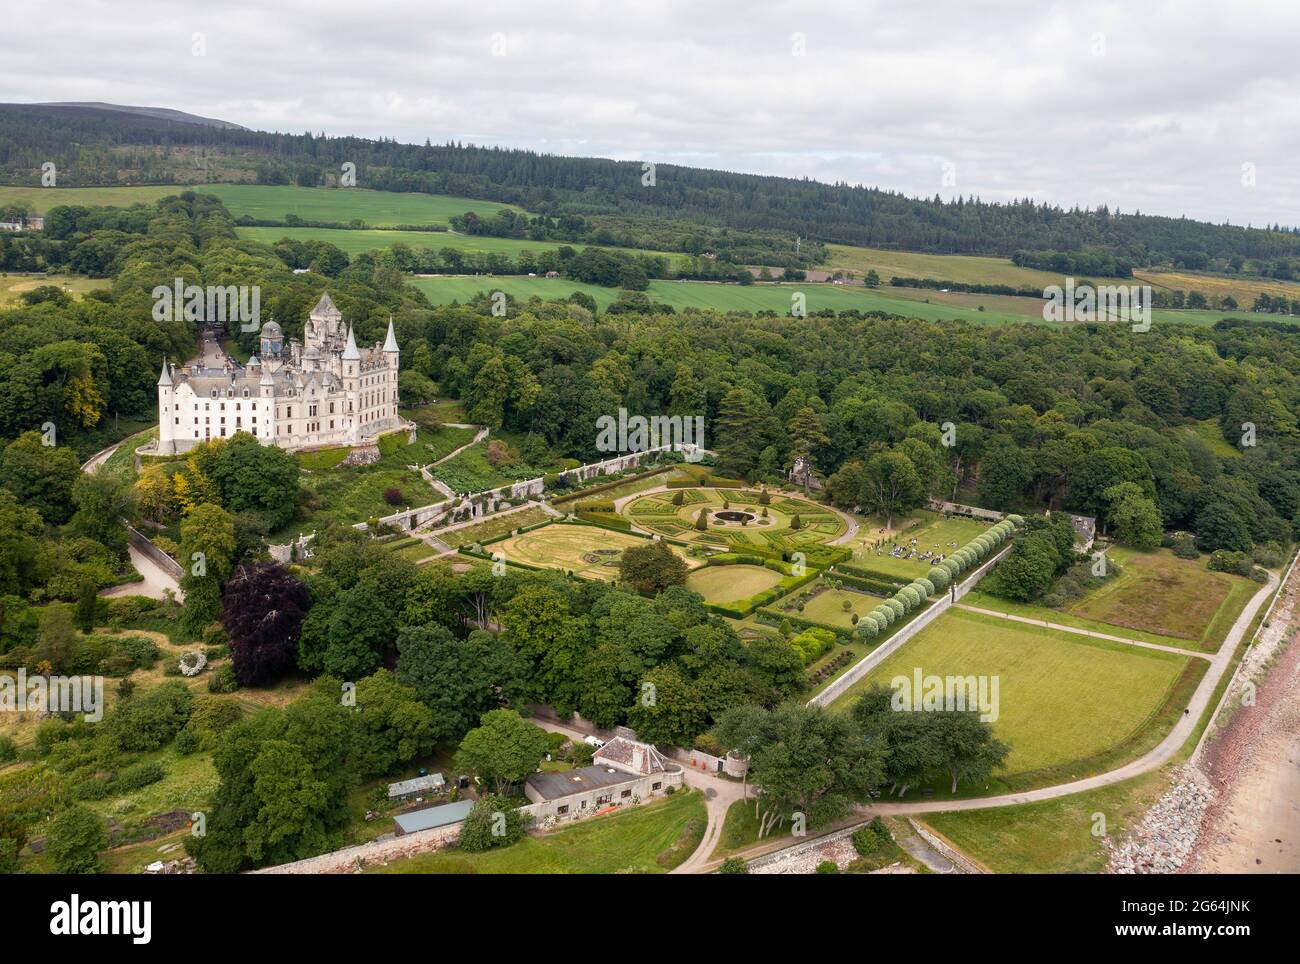 Aerial view of Dunrobin Castle, Golspie, Sutherland, Scotland, Home of the Earls and Dukes of Sutherland. Stock Photo